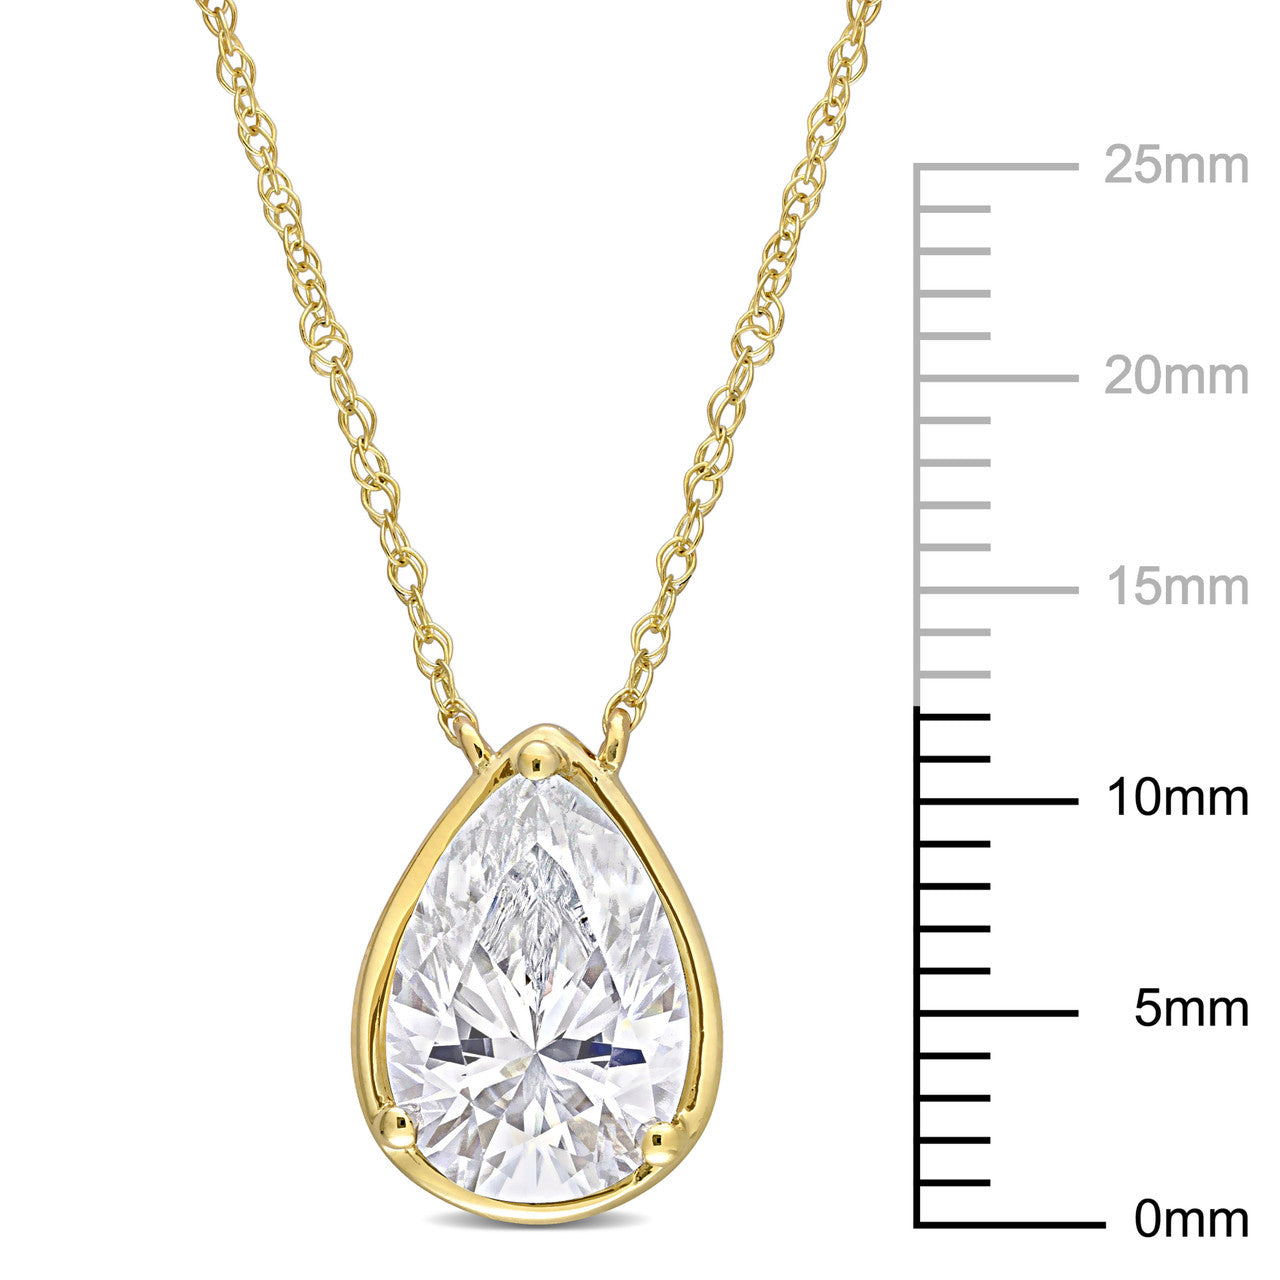 Ice Jewellery 2 CT Created Moissanite-White Solitaire Drop Pendant With Chain in 10k Yellow Gold - 75000005771 | Ice Jewellery Australia